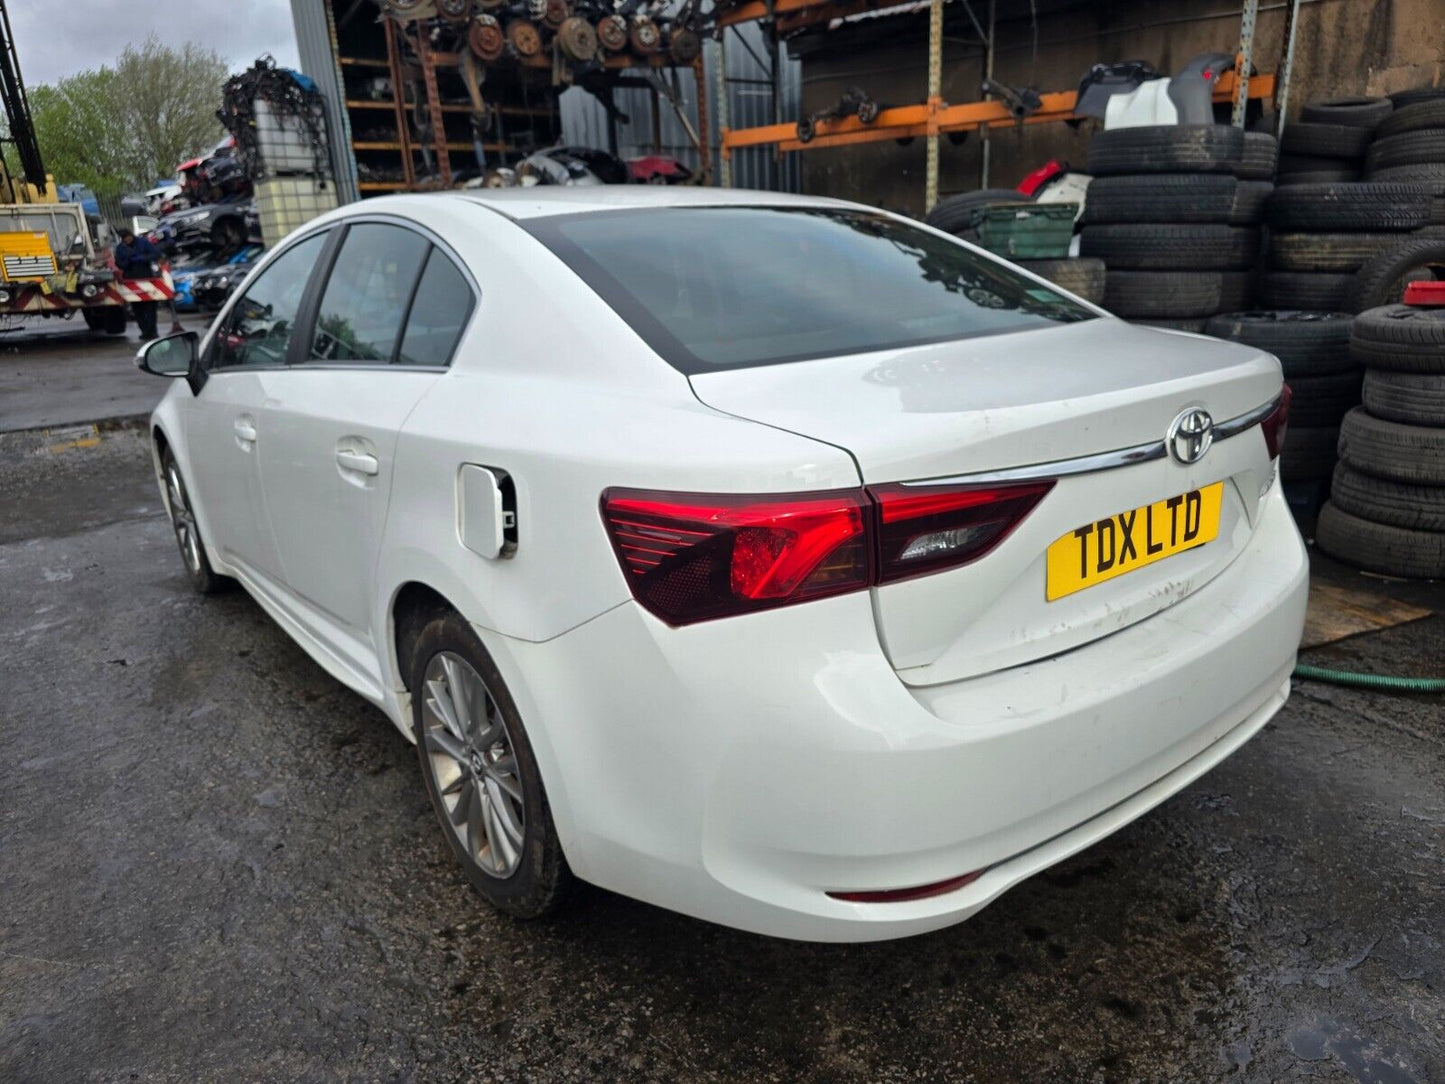 2017 TOYOTA AVENSIS BUSINESS EDITION MK3 T270 1.6 DIESEL MANUAL PARTS SPARES